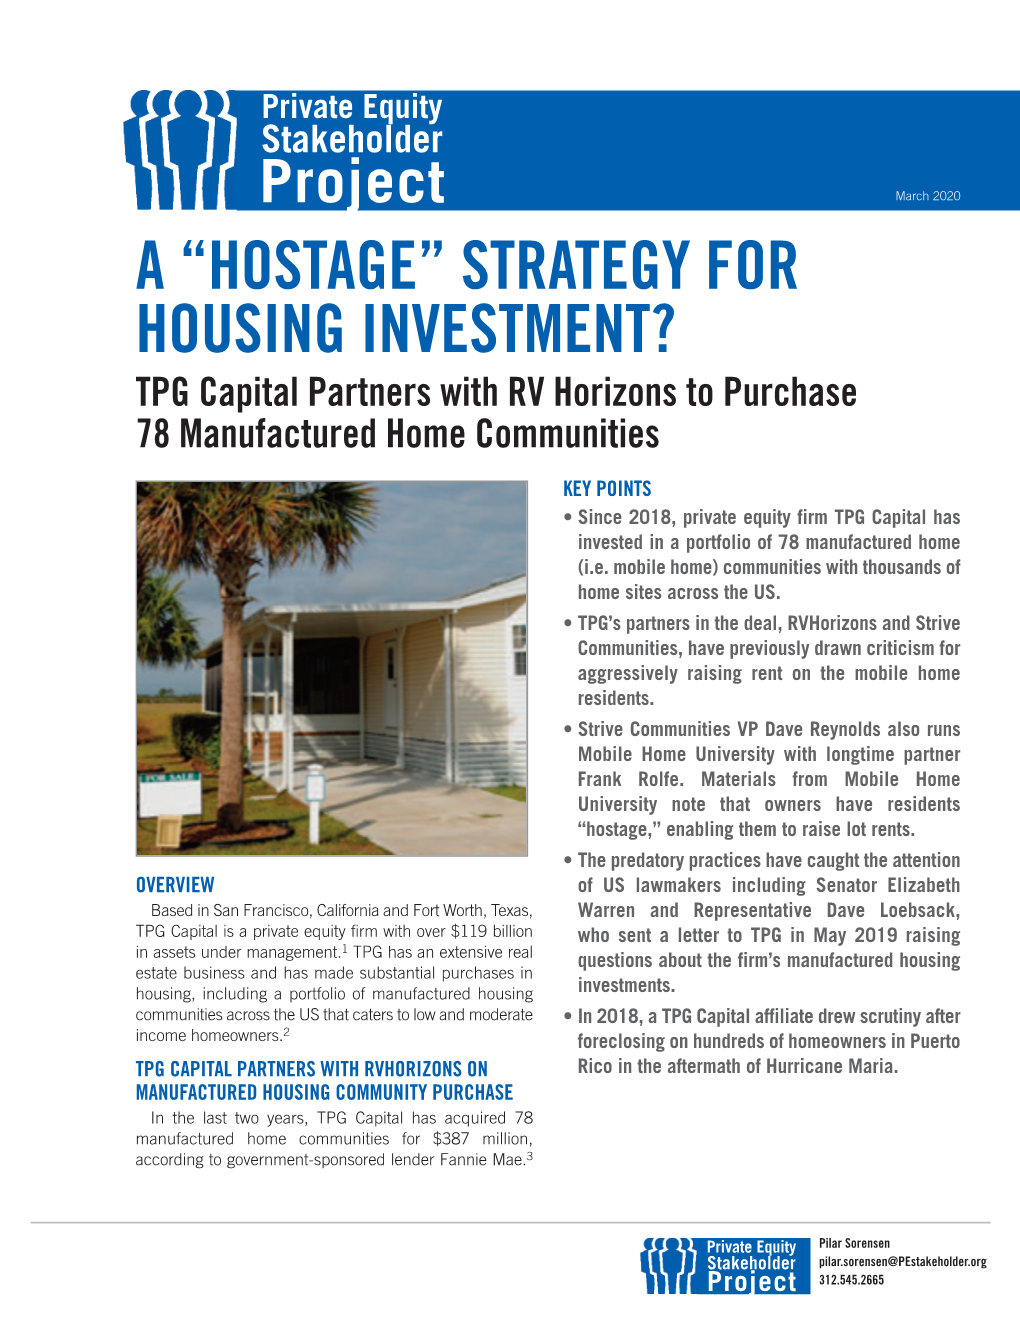 A “HOSTAGE” STRATEGY for HOUSING INVESTMENT? TPG Capital Partners with RV Horizons to Purchase 78 Manufactured Home Communities